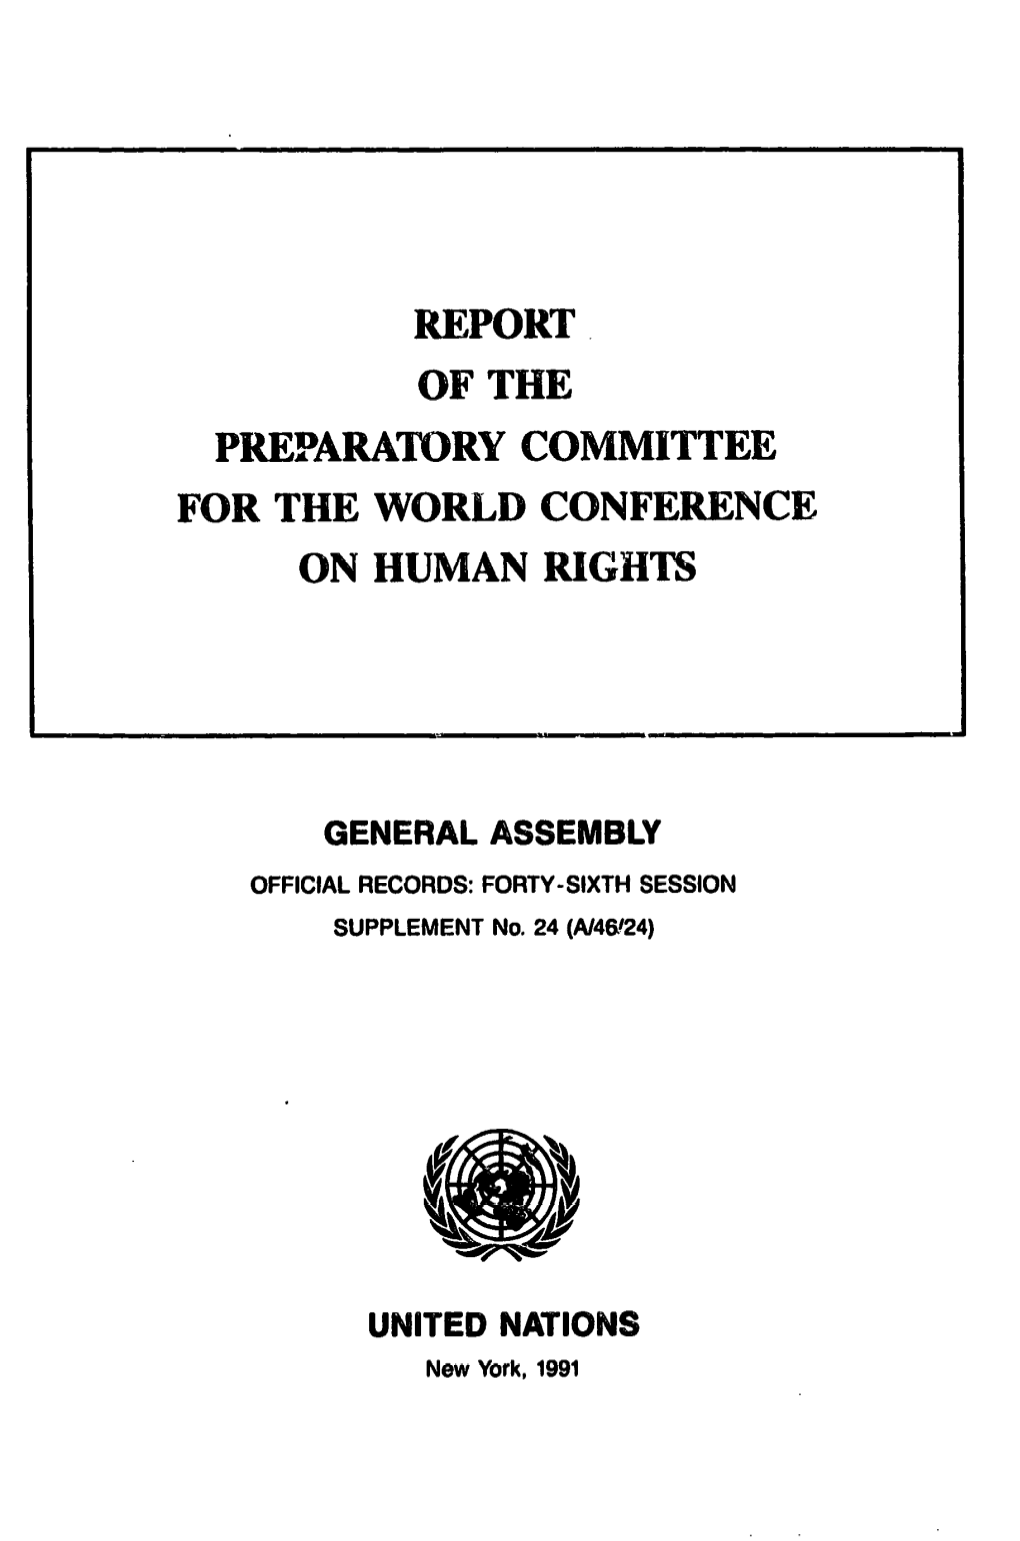 Report. of the Preparatory Committee for the World Conference on Human Rights